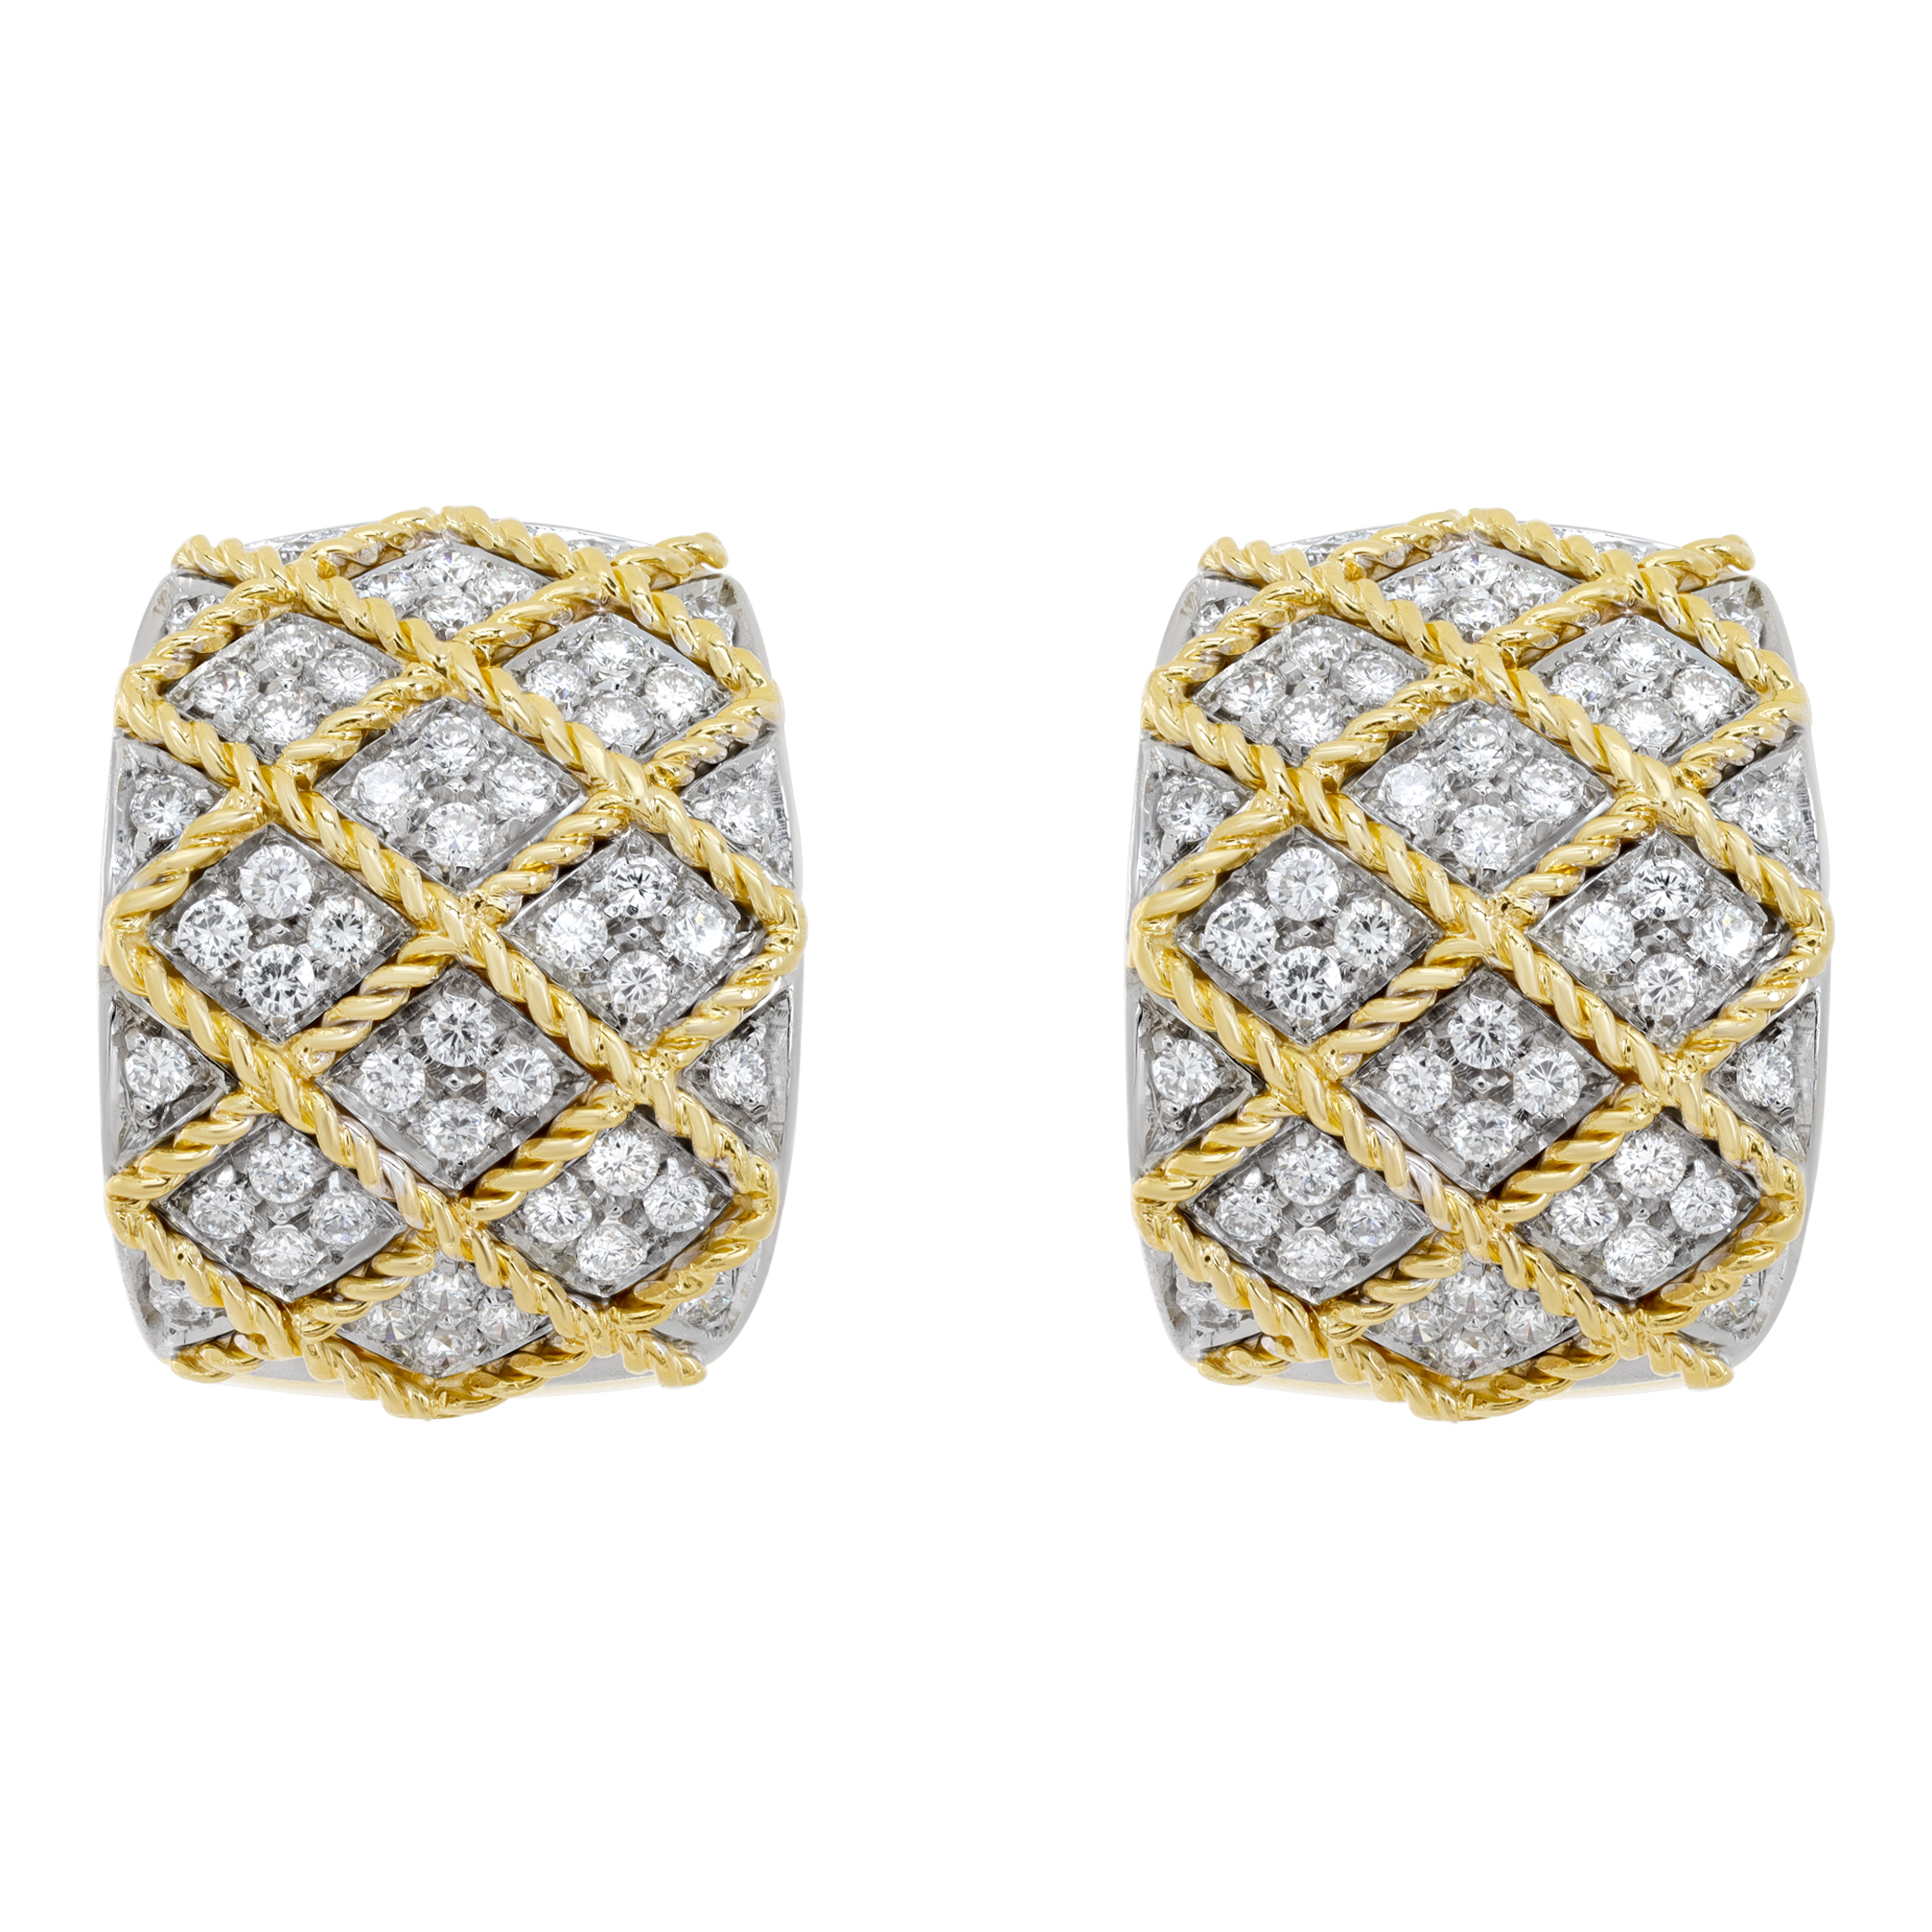 Made in Italy wide semi hoops diamonds earring in 18K yellow gold with post Omega clip. Round brilliant diamonds total approx. weight over 2.00 carats